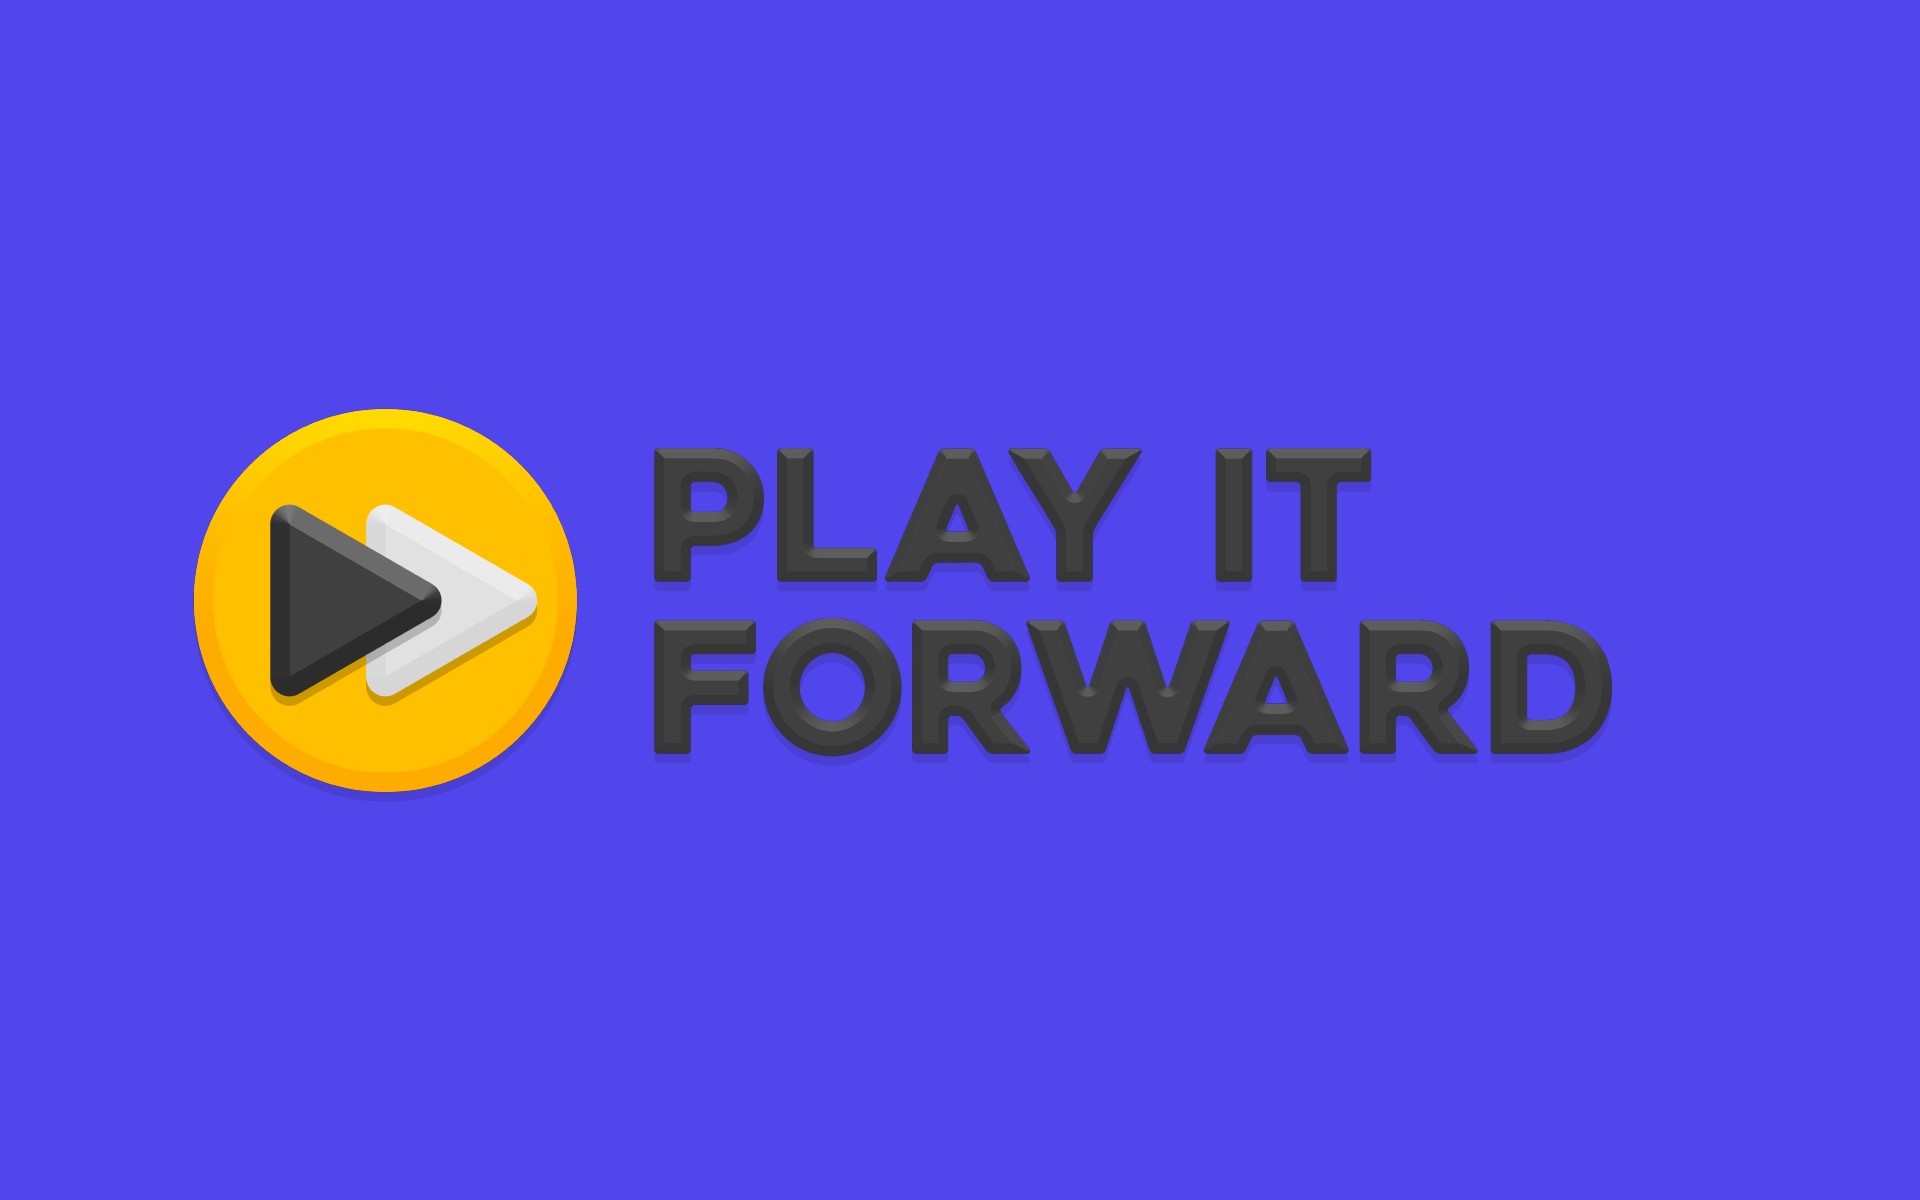 Play It Forward DAO Guide: How to Make Money, Pros, Cons, and Getting Started